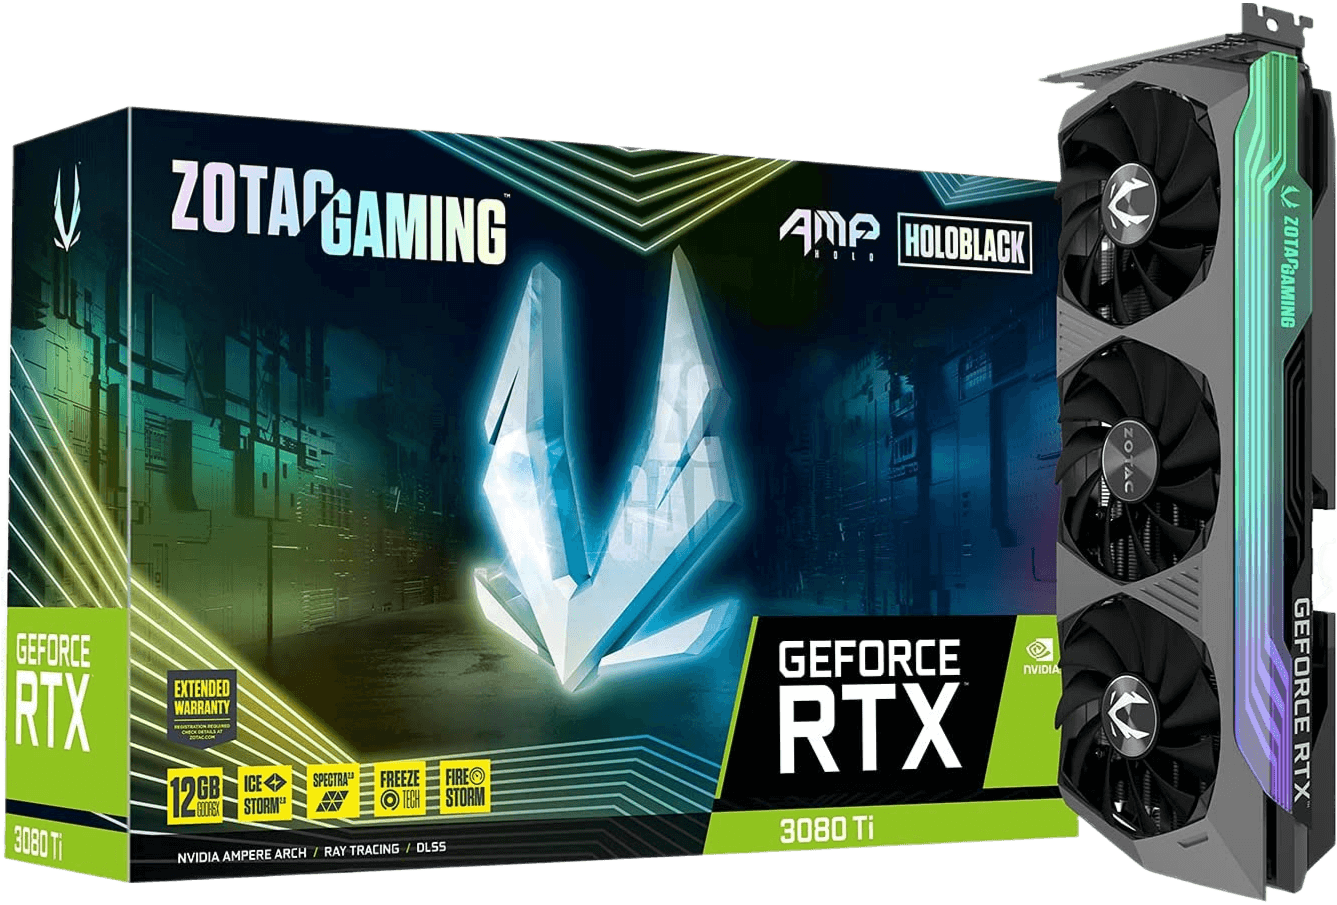 ZOTAC GAMING GeForce RTX 3080 AMP Holo 10GB GDDR6X 320-bit 19 Gbps PCIE 4.0 Gaming HoloBlack IceStorm 2.0 Advanced Cooling SPECTRA 2.0 RGB Lighting Graphics Card ZT-A30800F-10P